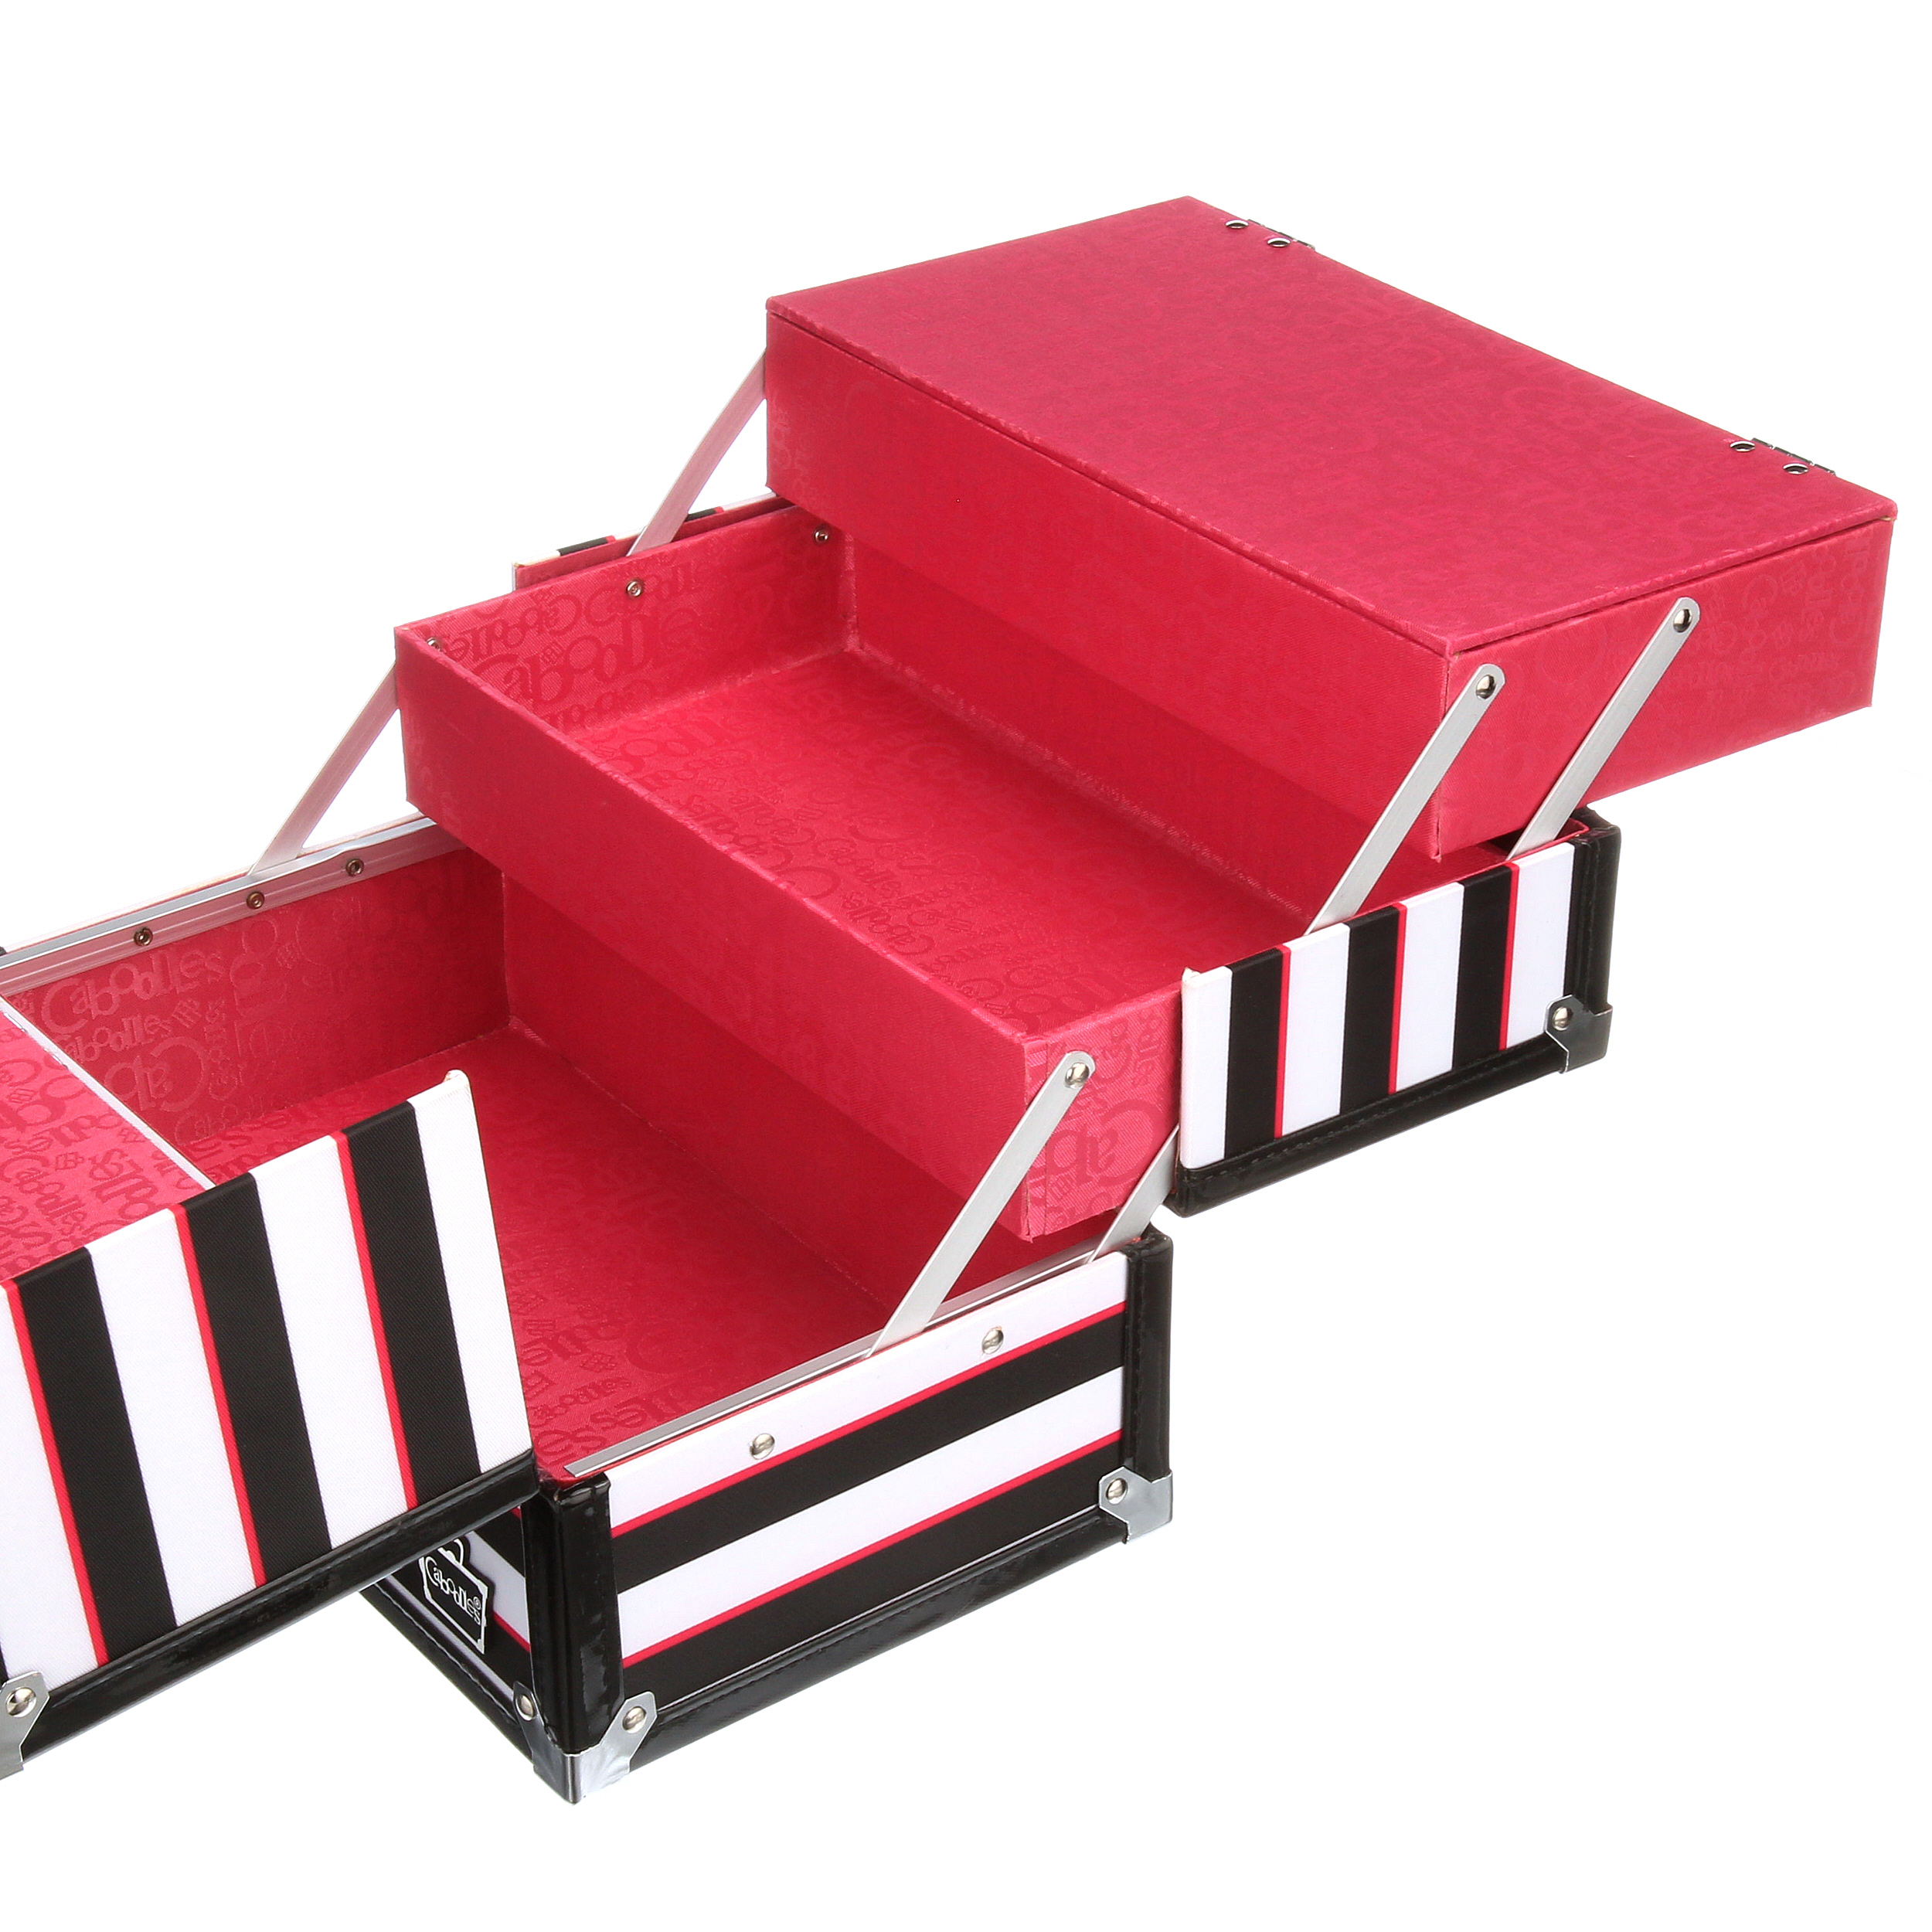 Caboodles Inspired Makeup Case, 2 Tray, Multi Color Striped - image 3 of 7